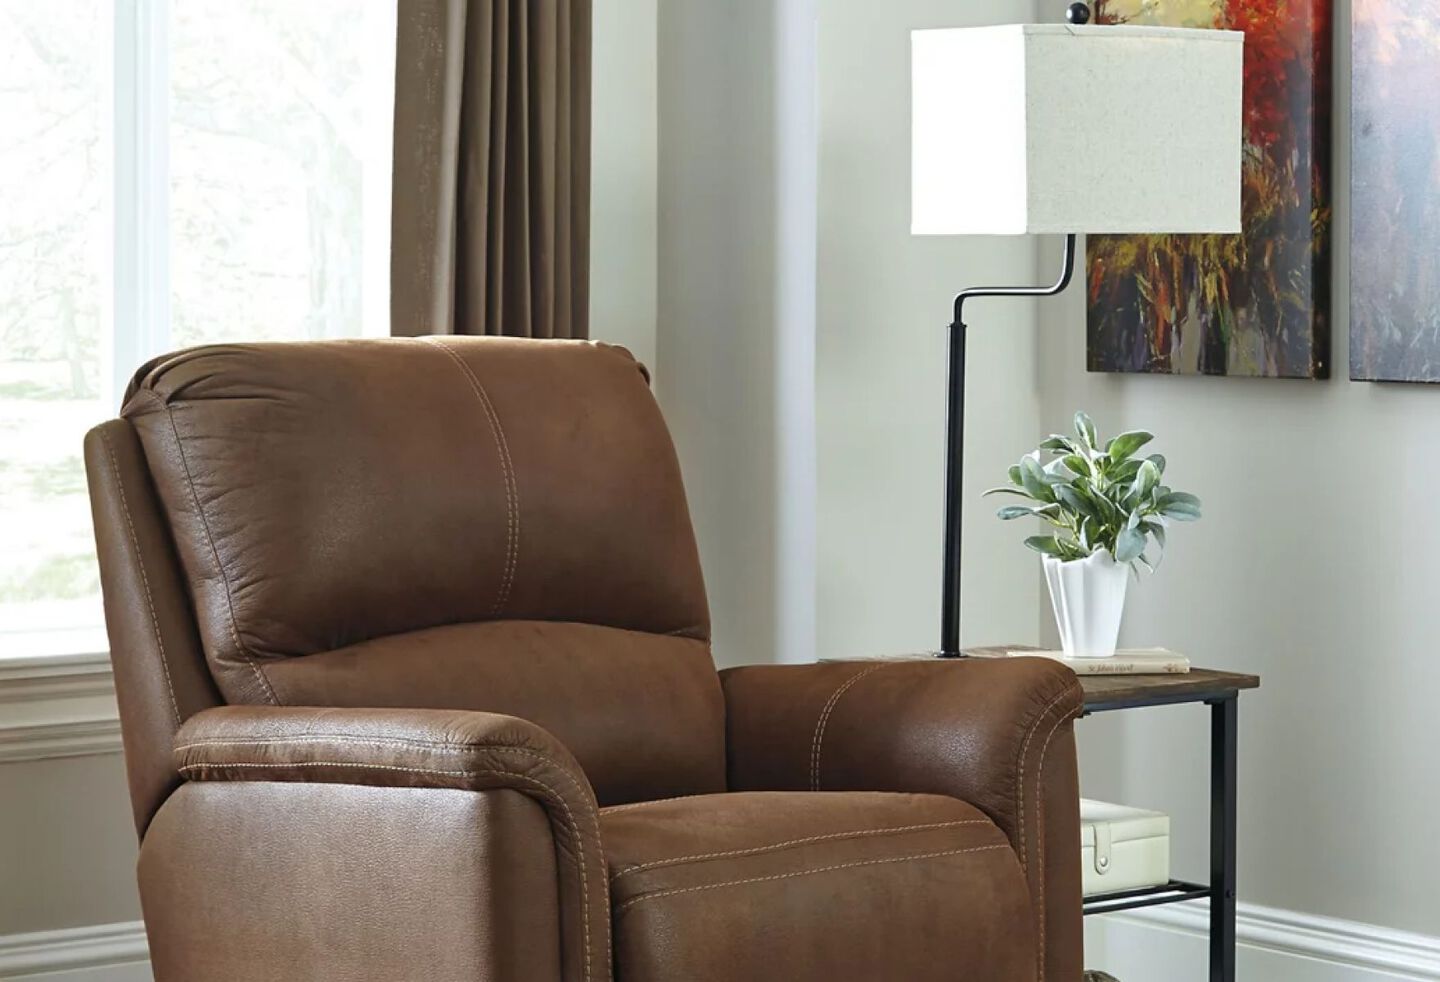 Living room with brown leather recliner, lamp, and side table